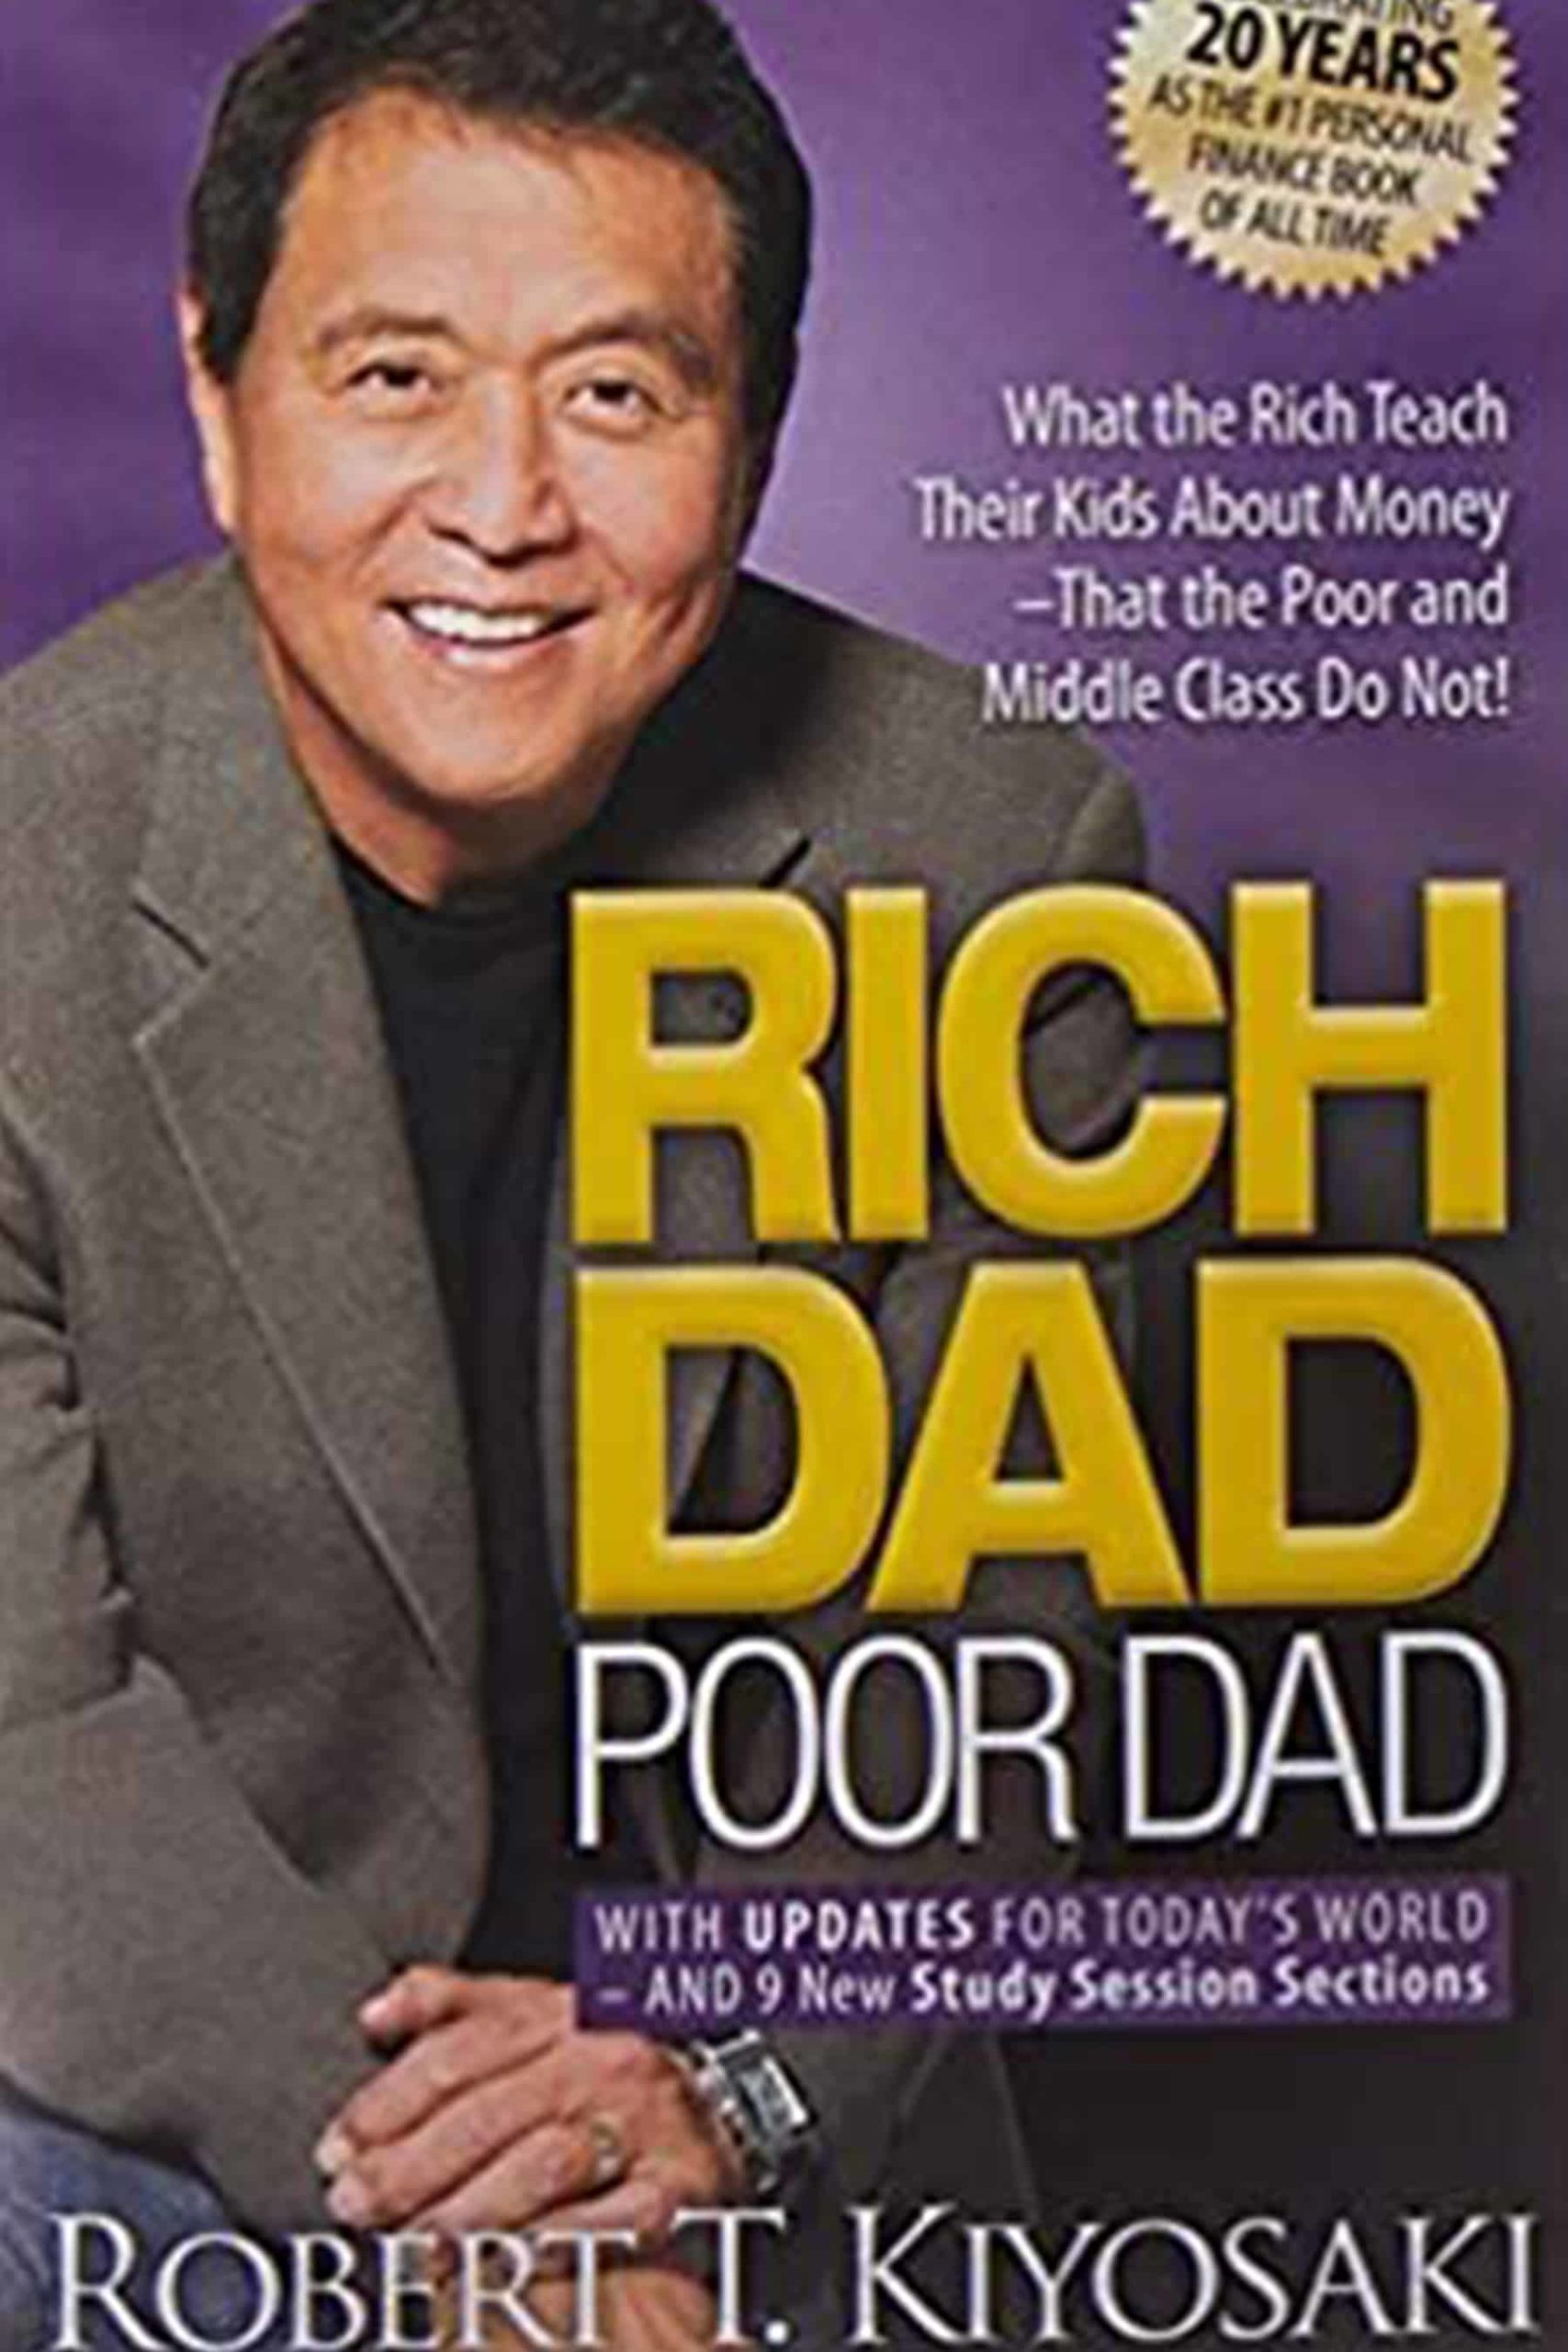  Rich Dad Poor Dad: What the Rich Teach Their Kids About Money That the Poor and Middle Class Do Not!